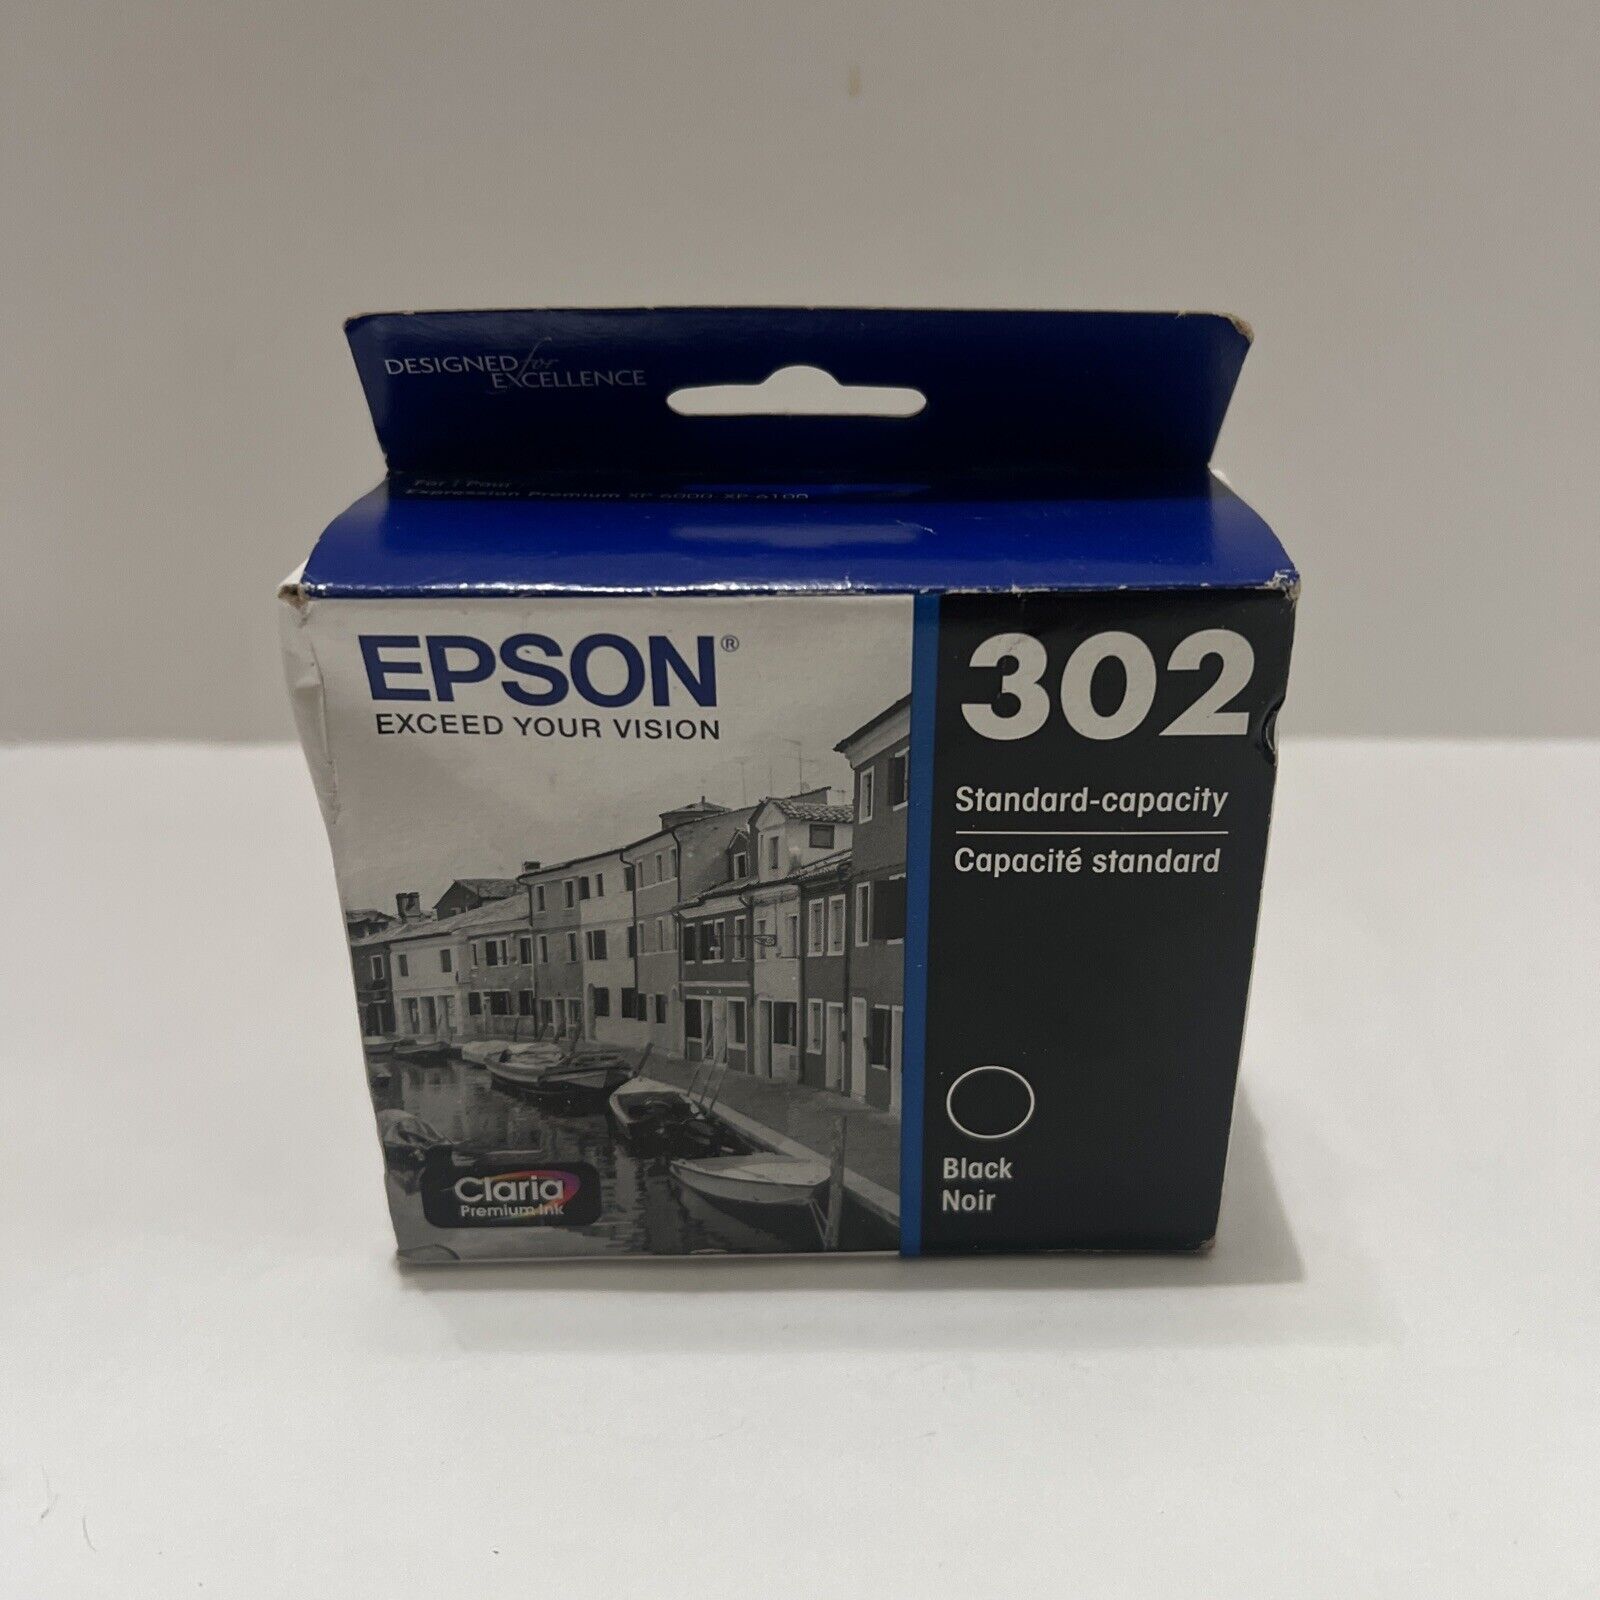 New Epson 302 Claria Black Ink Cartridge, (T302020-S) EXP  05/2024 New Sealed